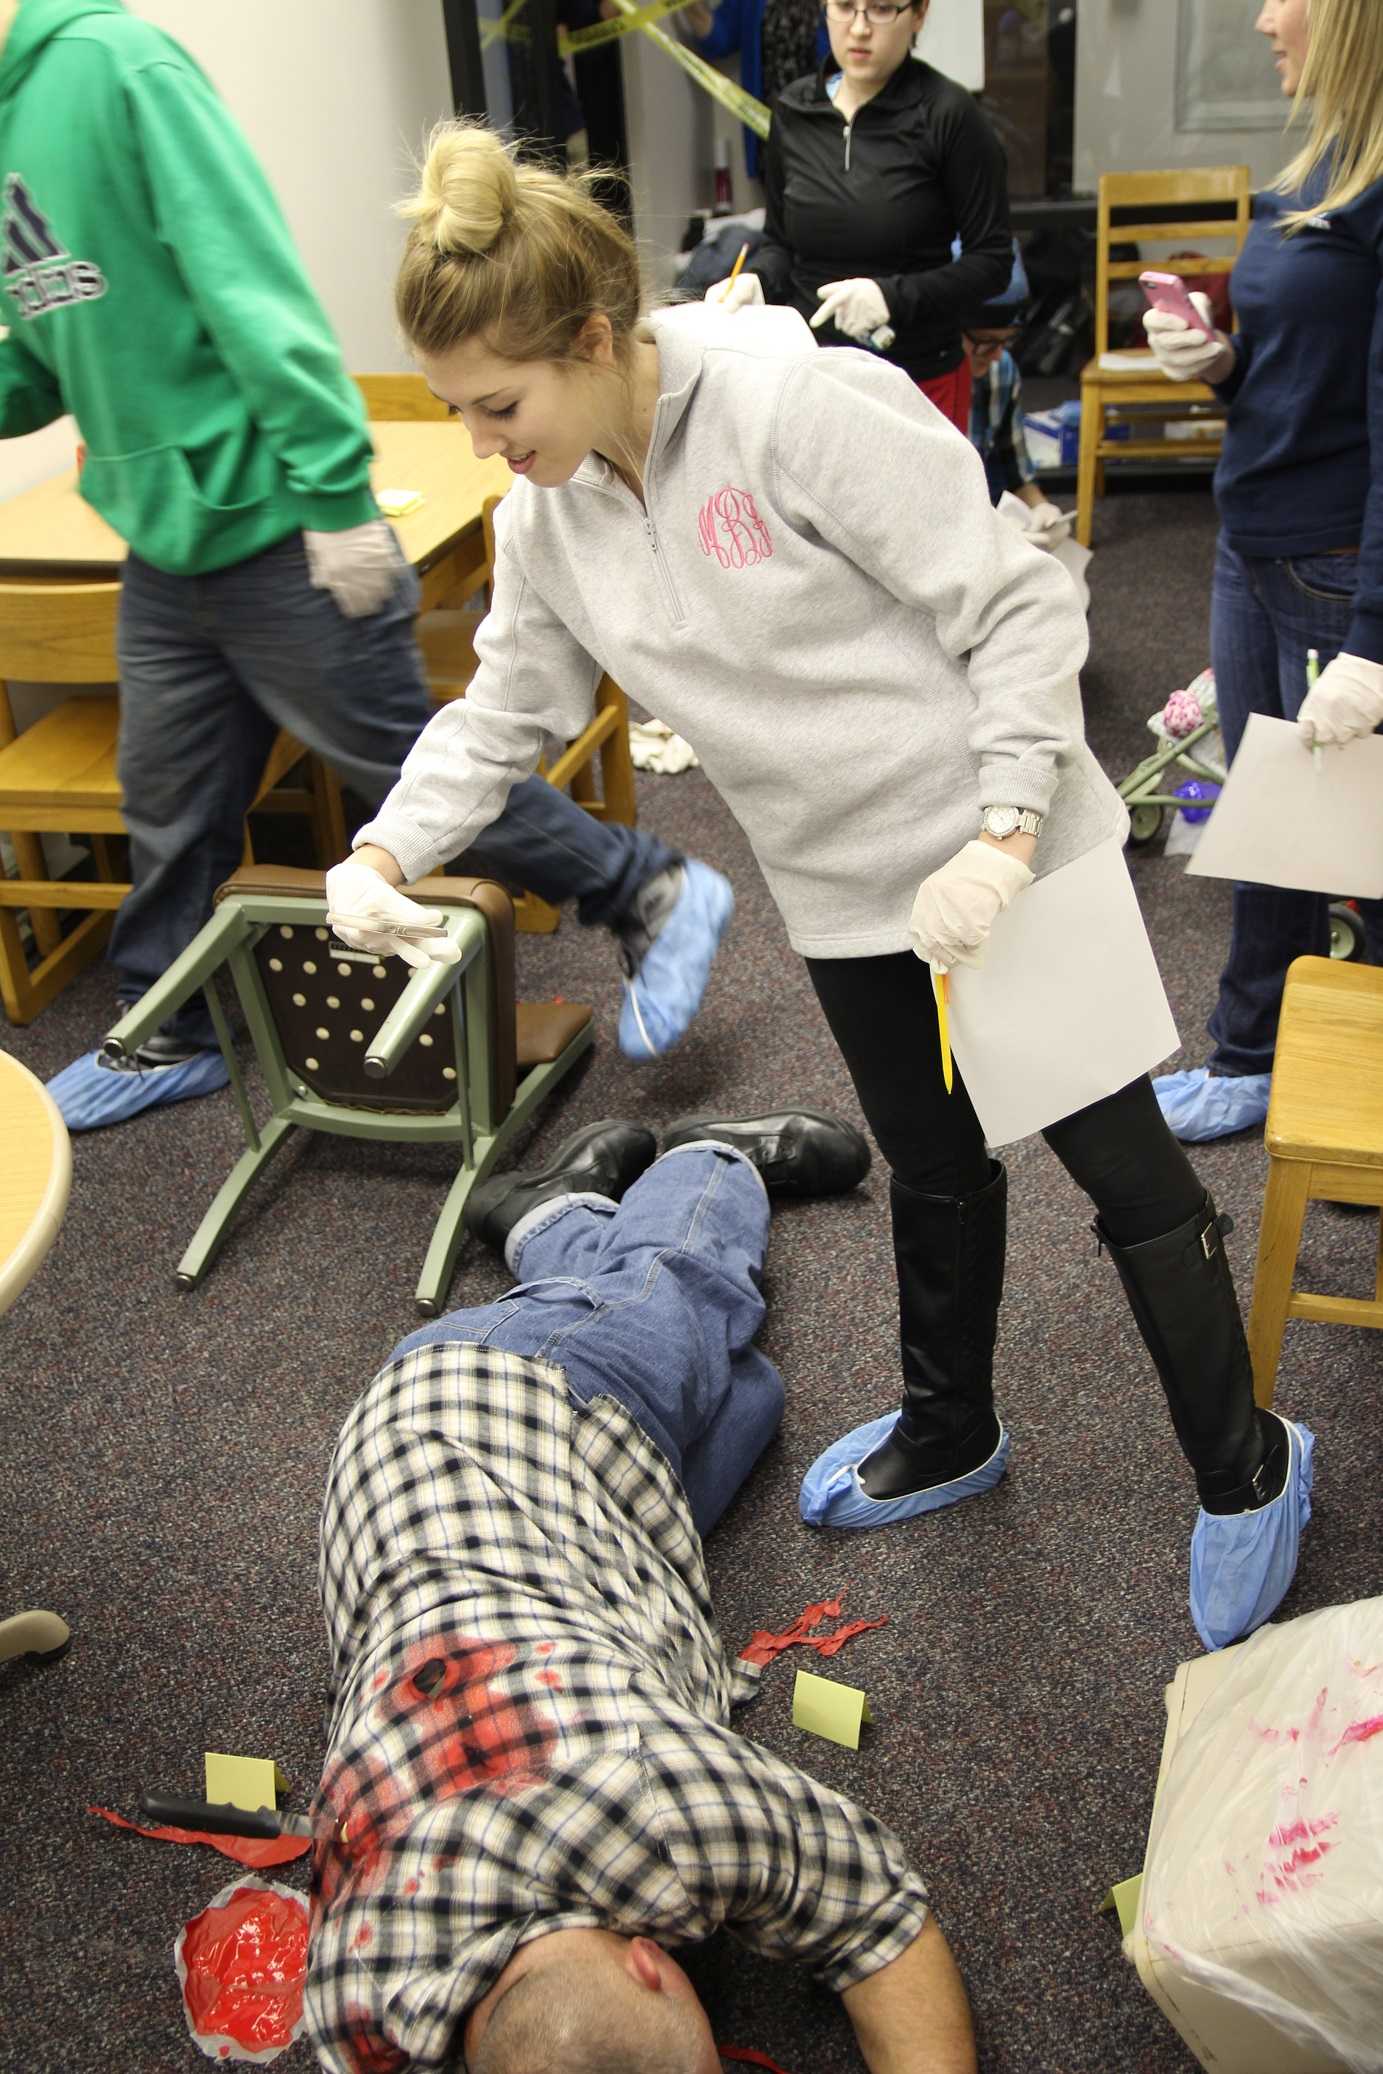 Students+learn+from+mock+crime+scene+in+Crestview+Hall